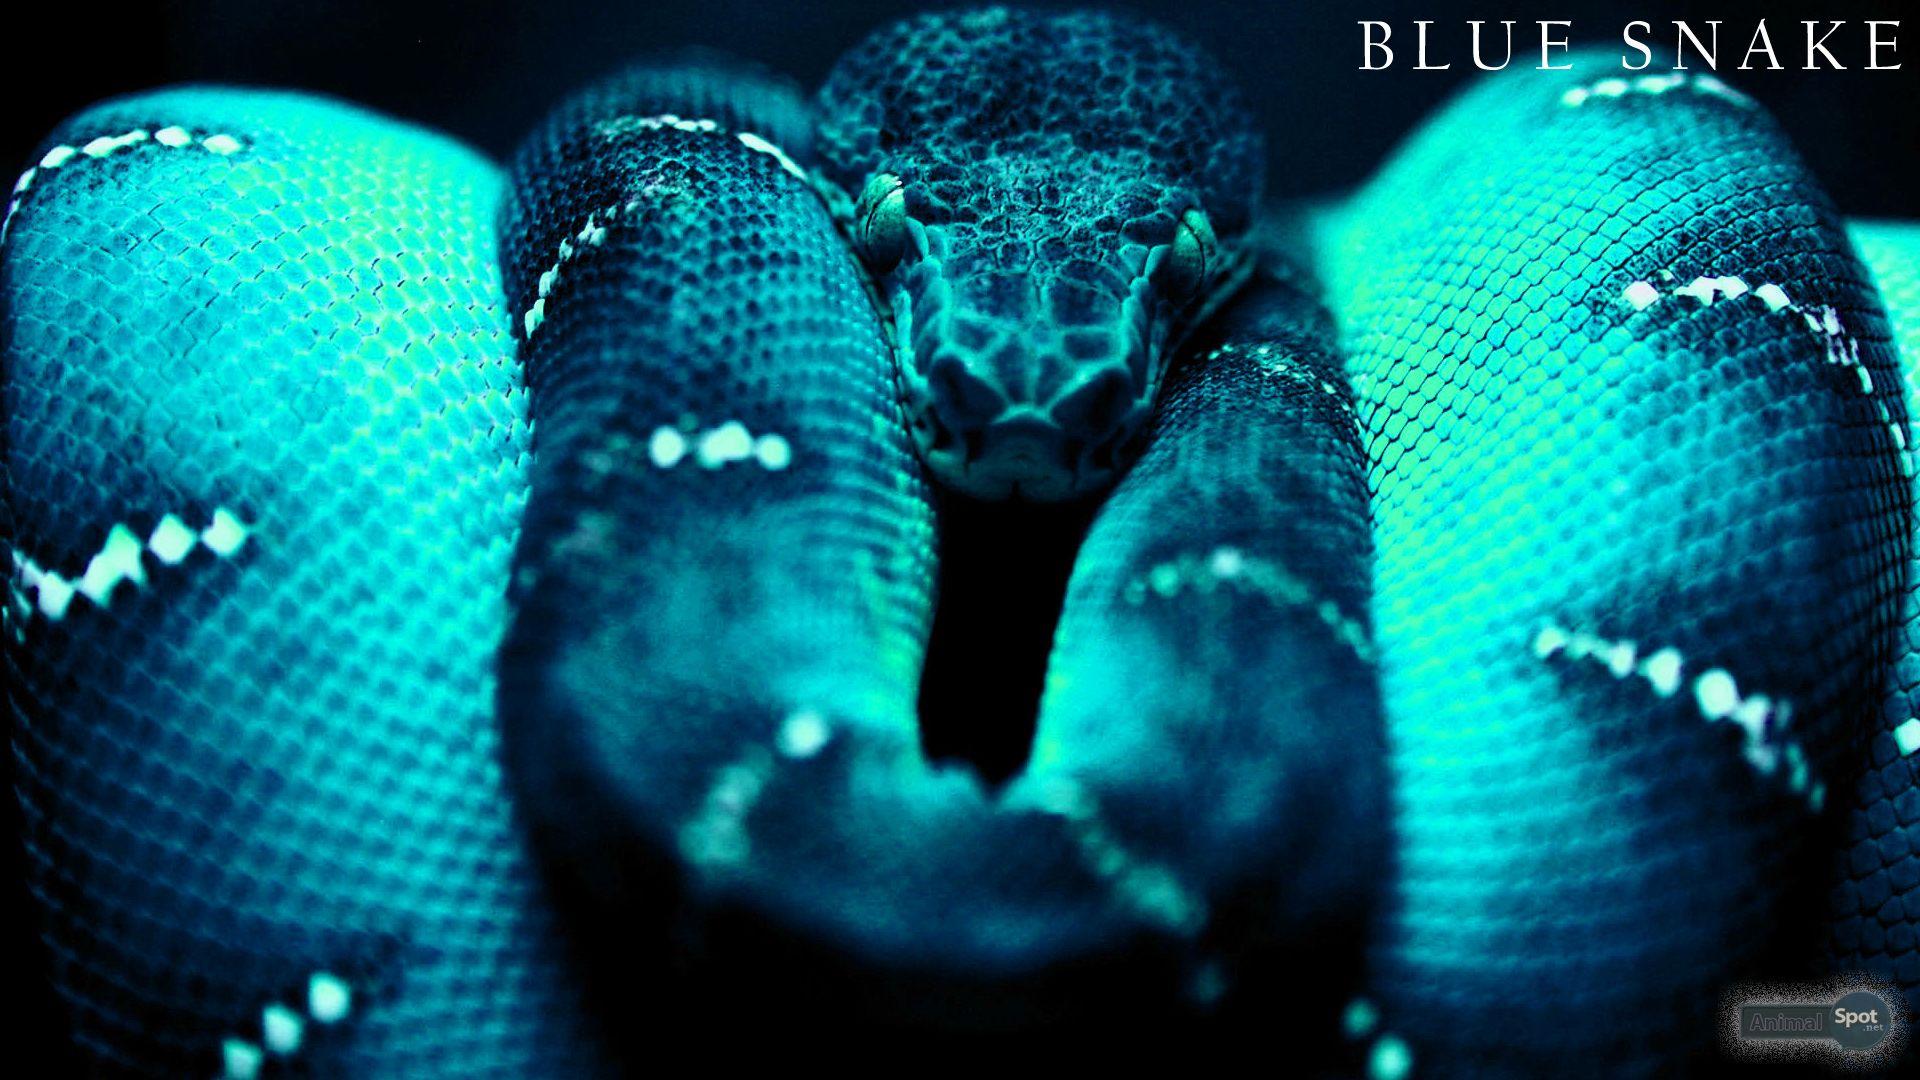 Wallpaper ID: 1849178 / Boa Constrictor, Selective Coloring, blue, snake,  black, 1080P free download